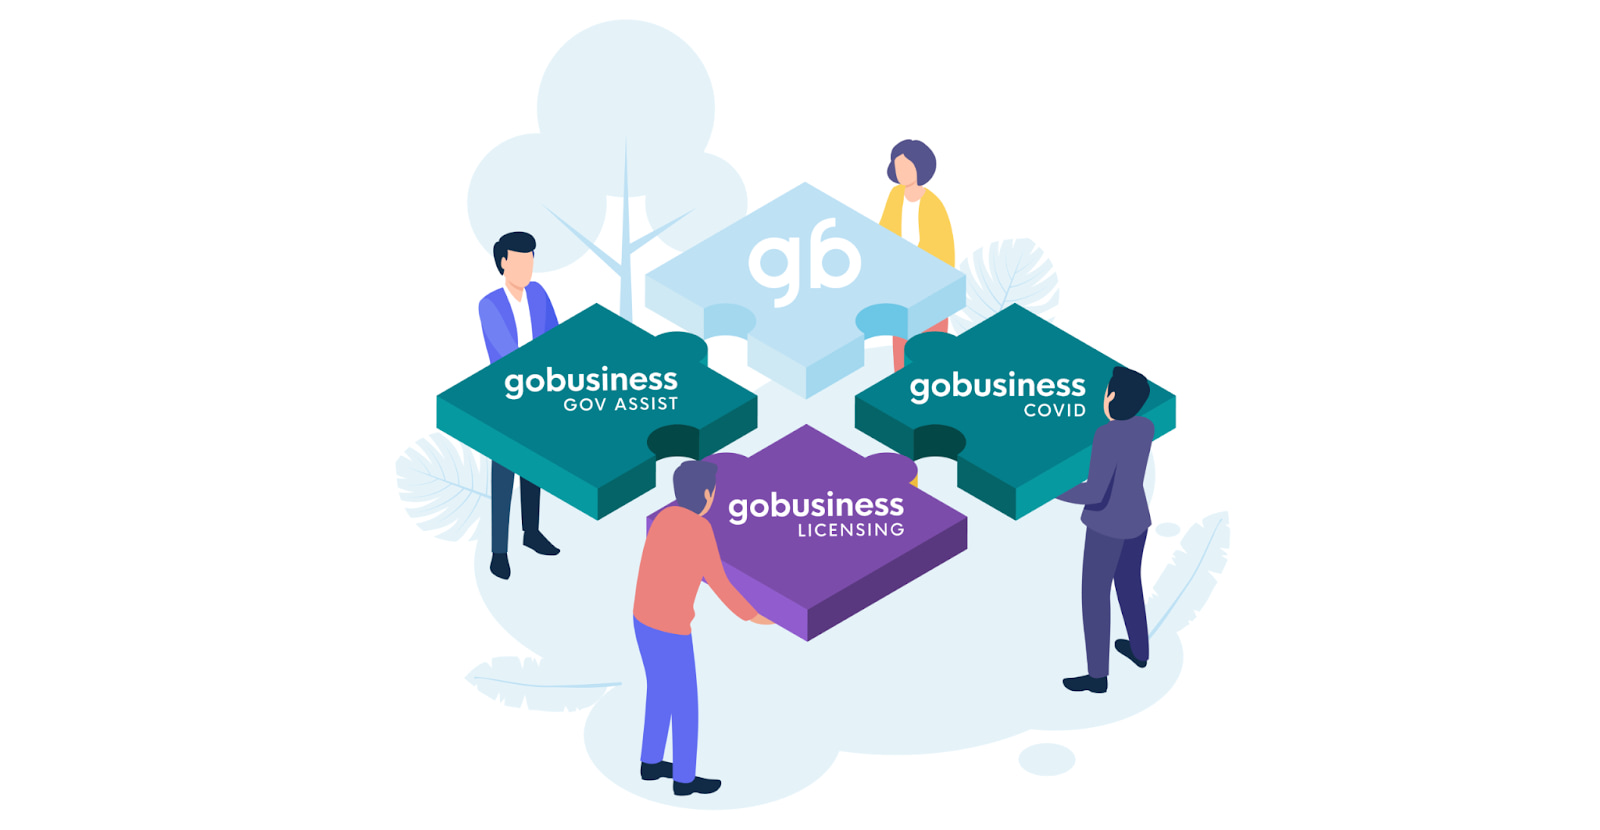 GoBusiness helps and assists business owners with different problems and licensing issues.